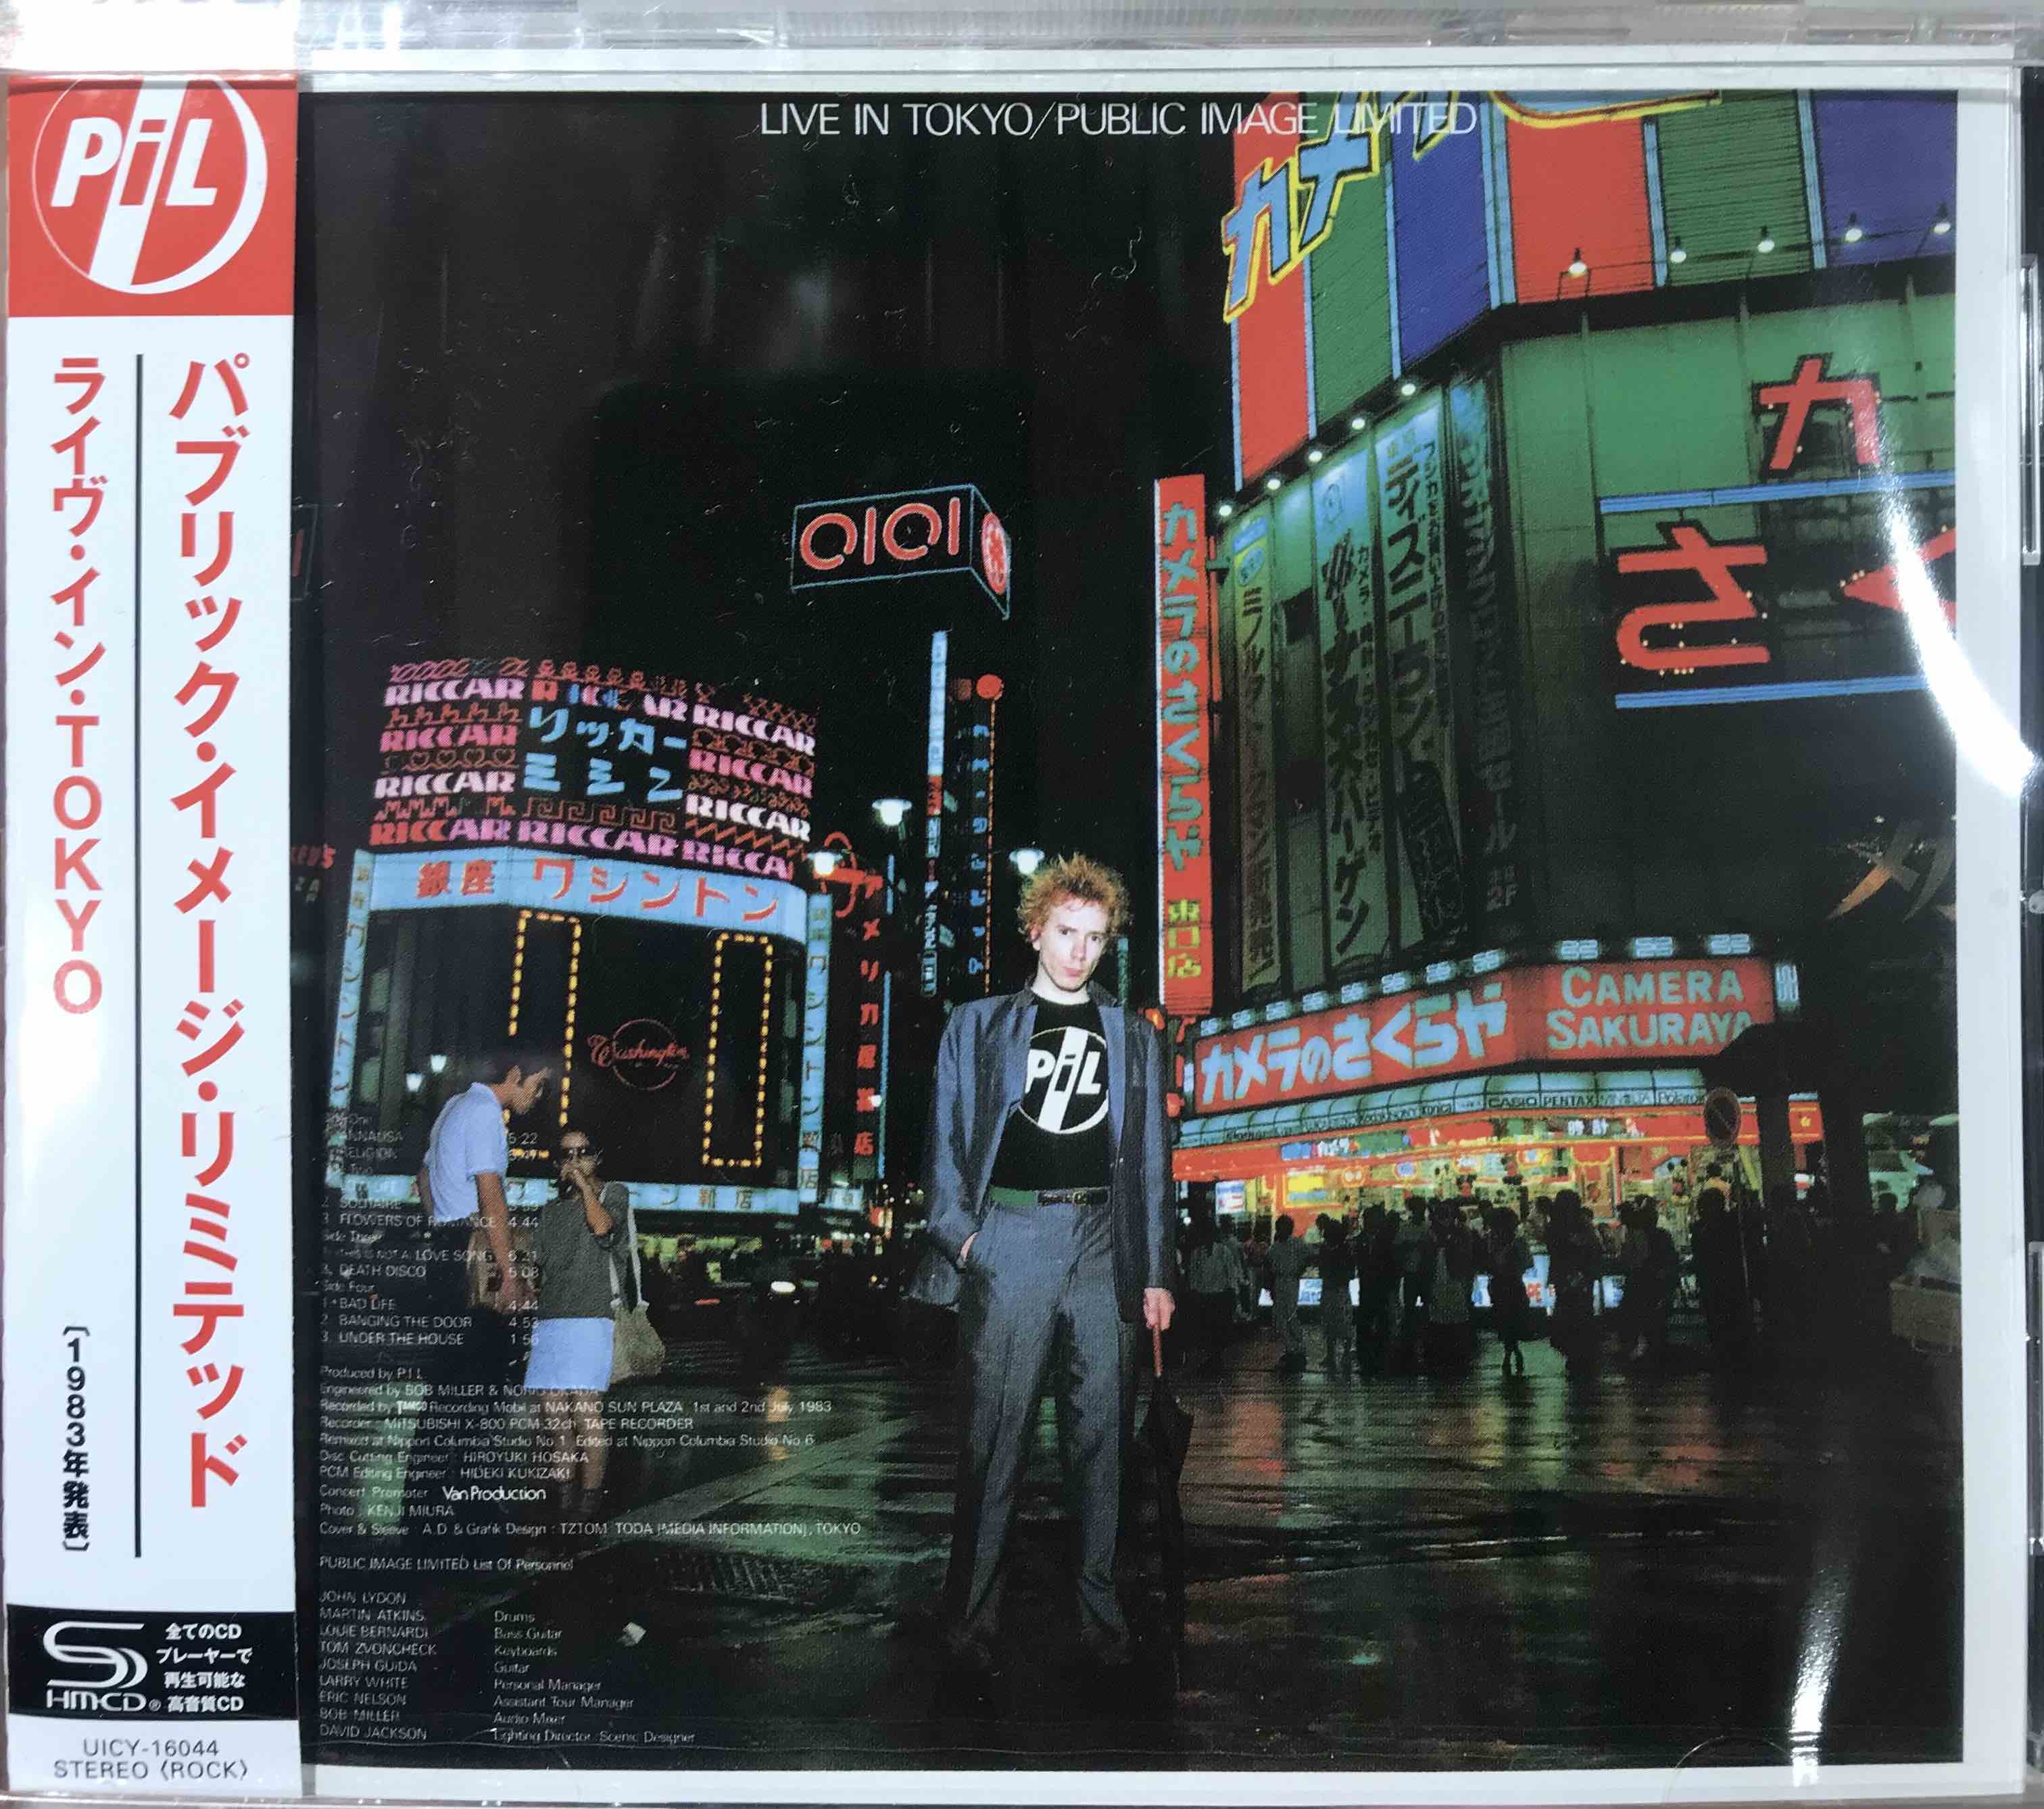 Public Image Limited - Live In Tokyo